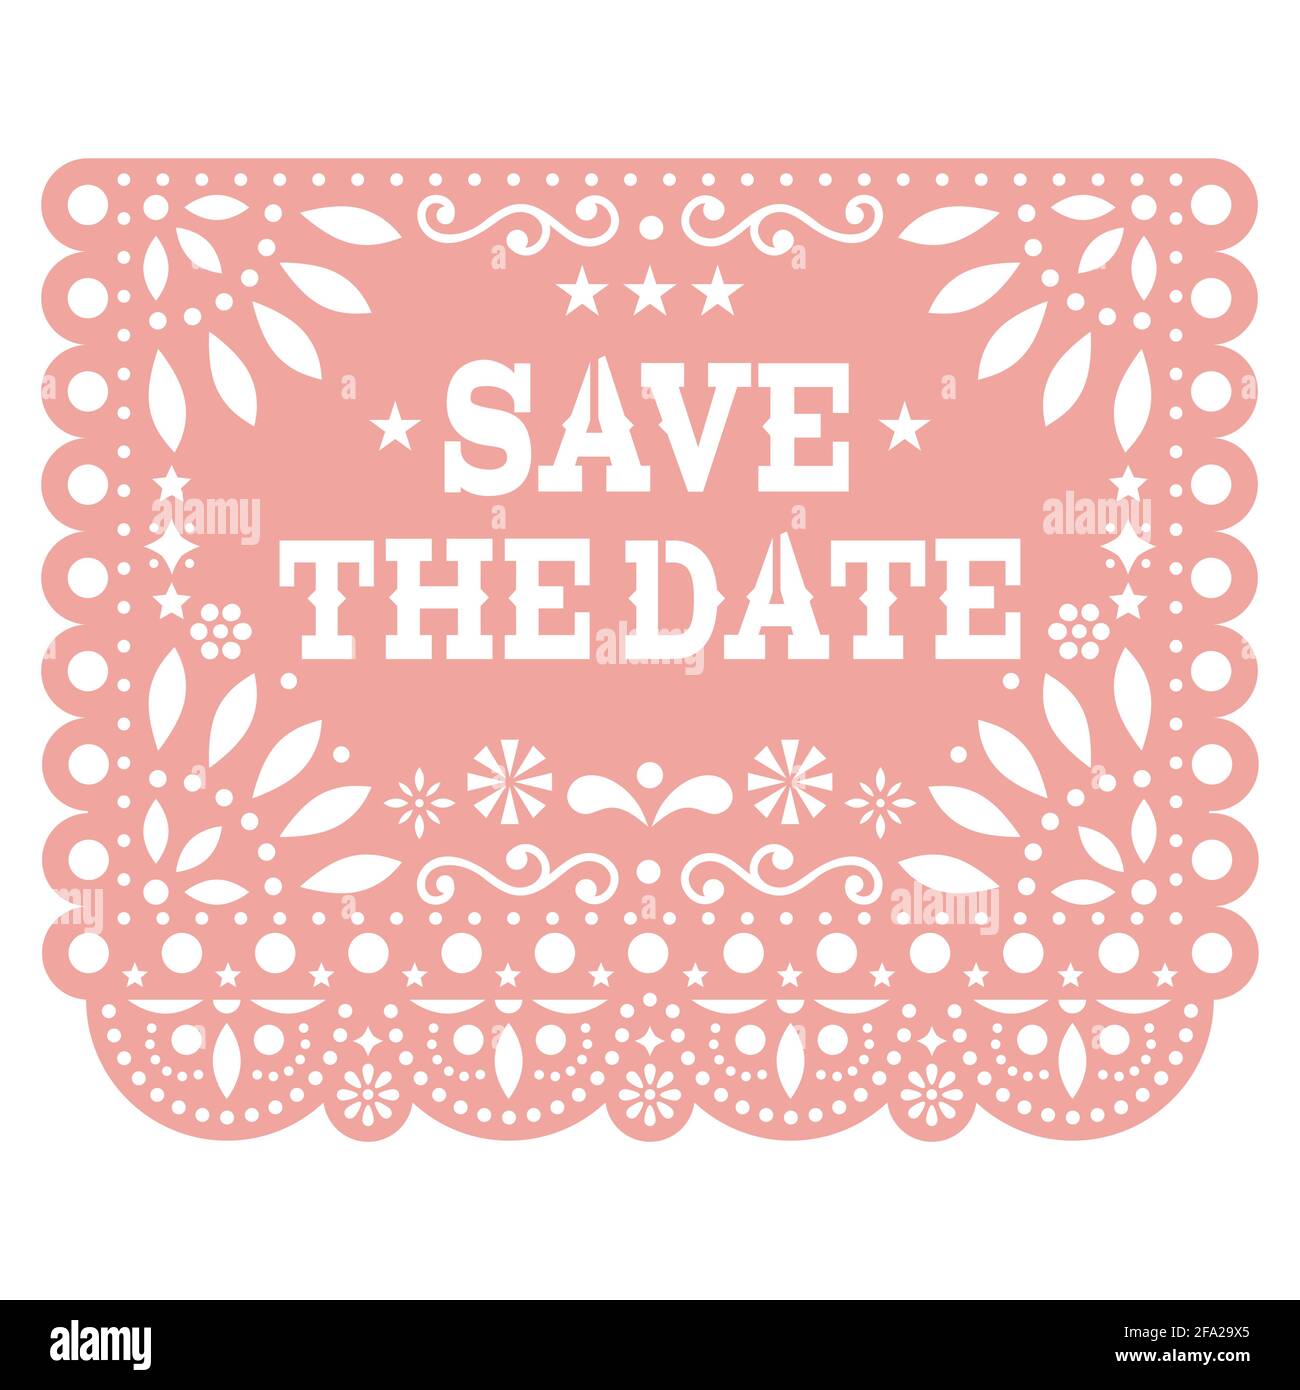 Save the date Papel Picado vector party banner design, Mexican cut out paper decoration with flowers, stars, and geometric shapes Stock Vector